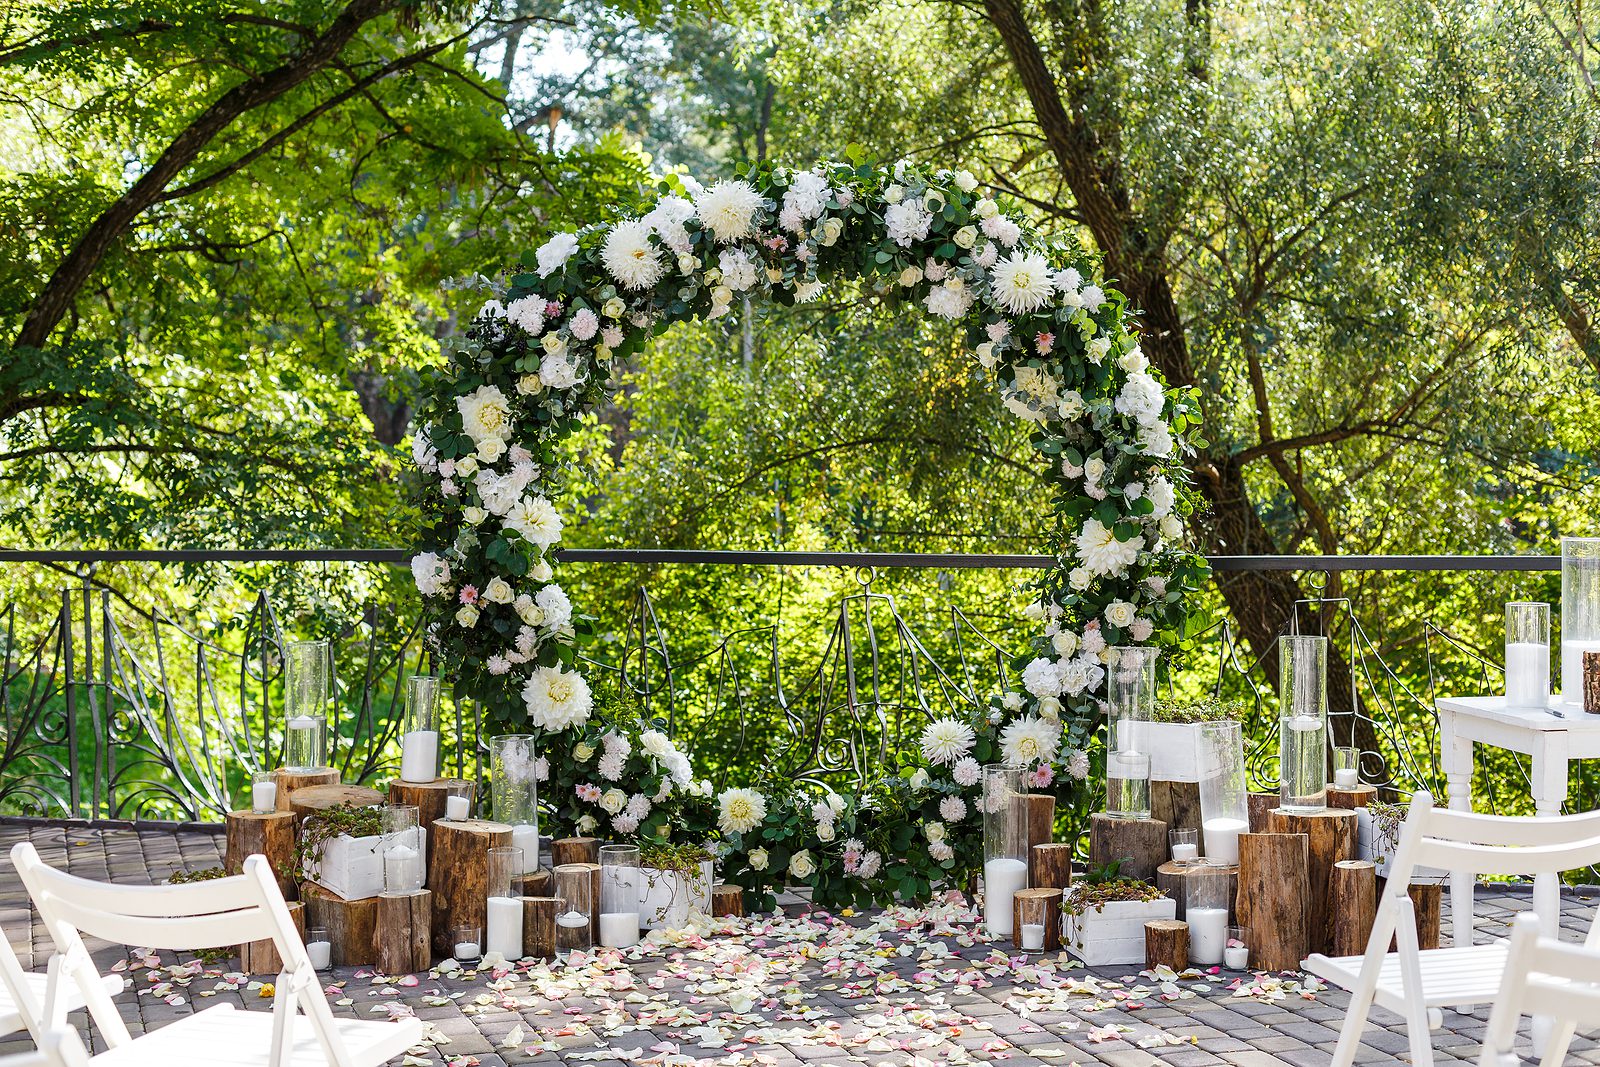 An outdoor wedding setup with a large floral arch of white and green flowers, surrounded by wooden logs, white chairs, and scattered petals, set against a lush green backdrop.